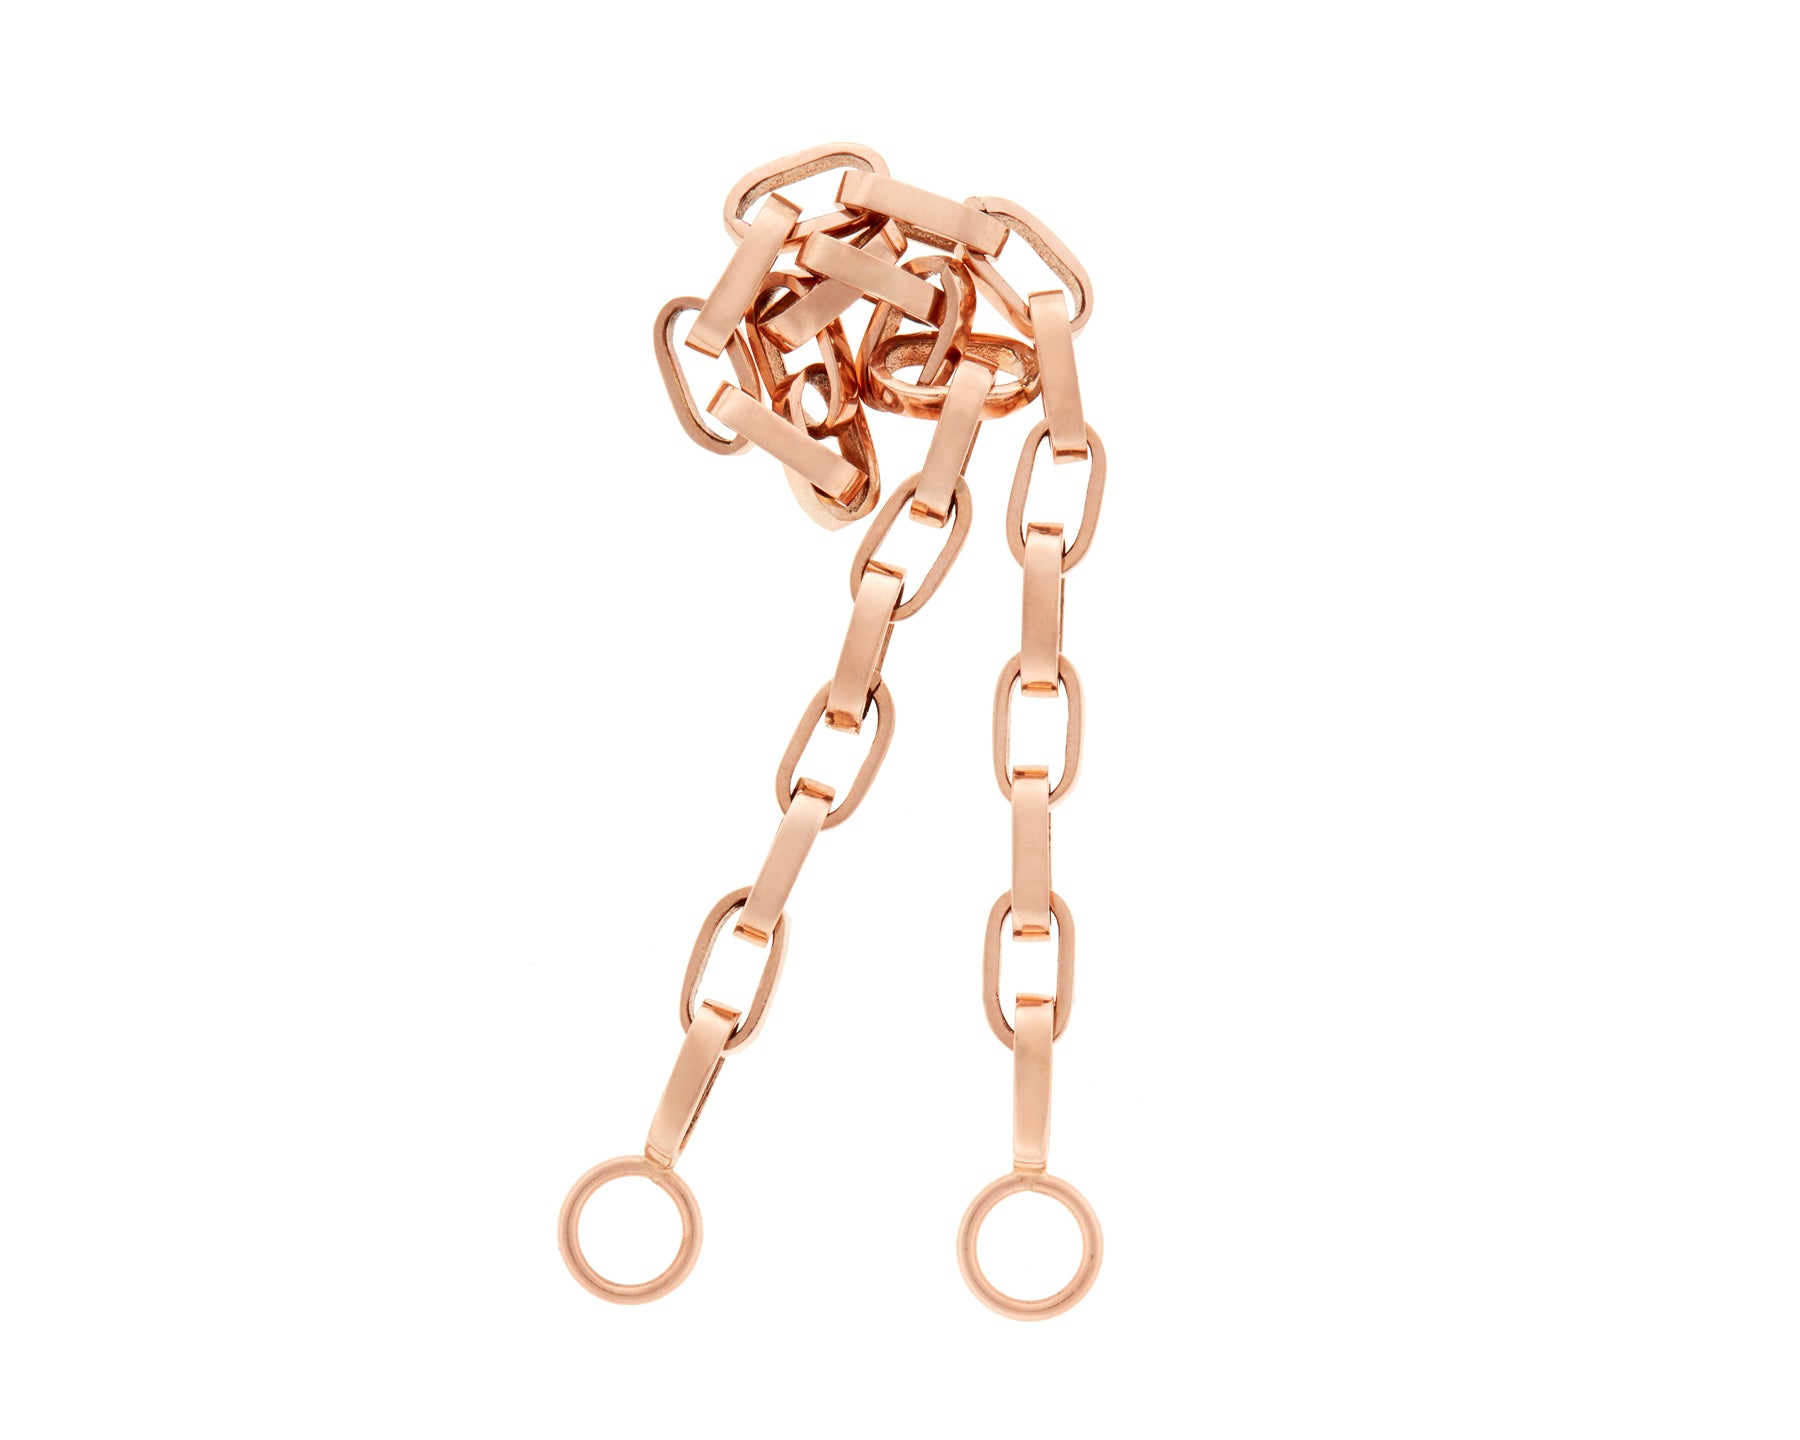 Curled up rose gold Marla Aaron biker chain against white backdrop